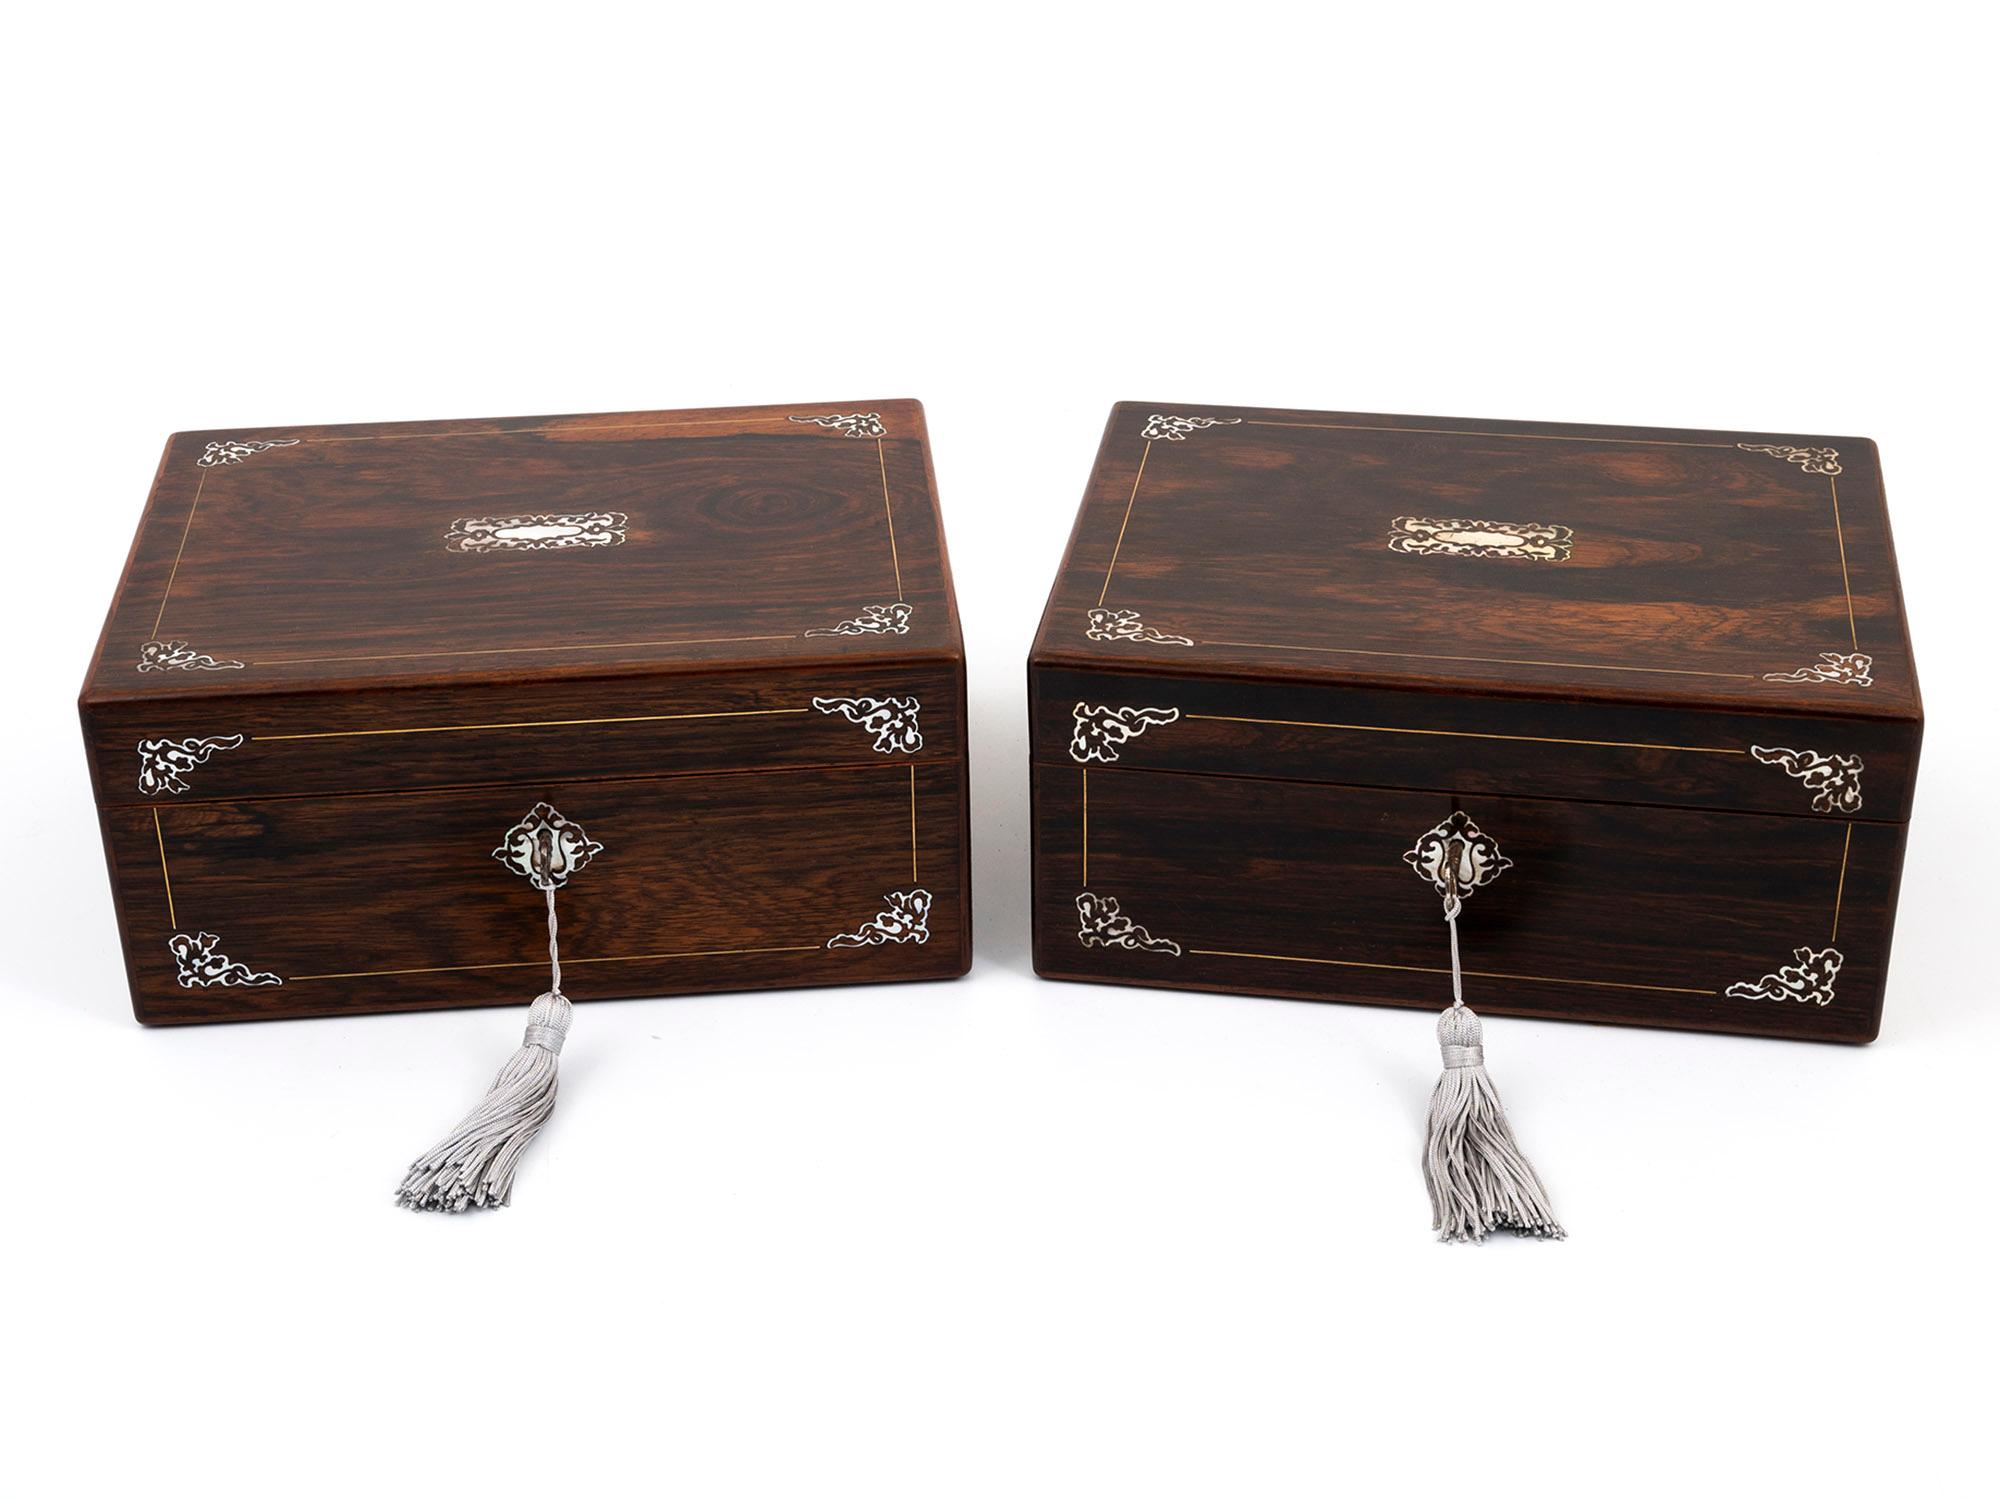 Georgian Rare Pair of Inlaid Rosewood Sewing Boxes For Sale 7